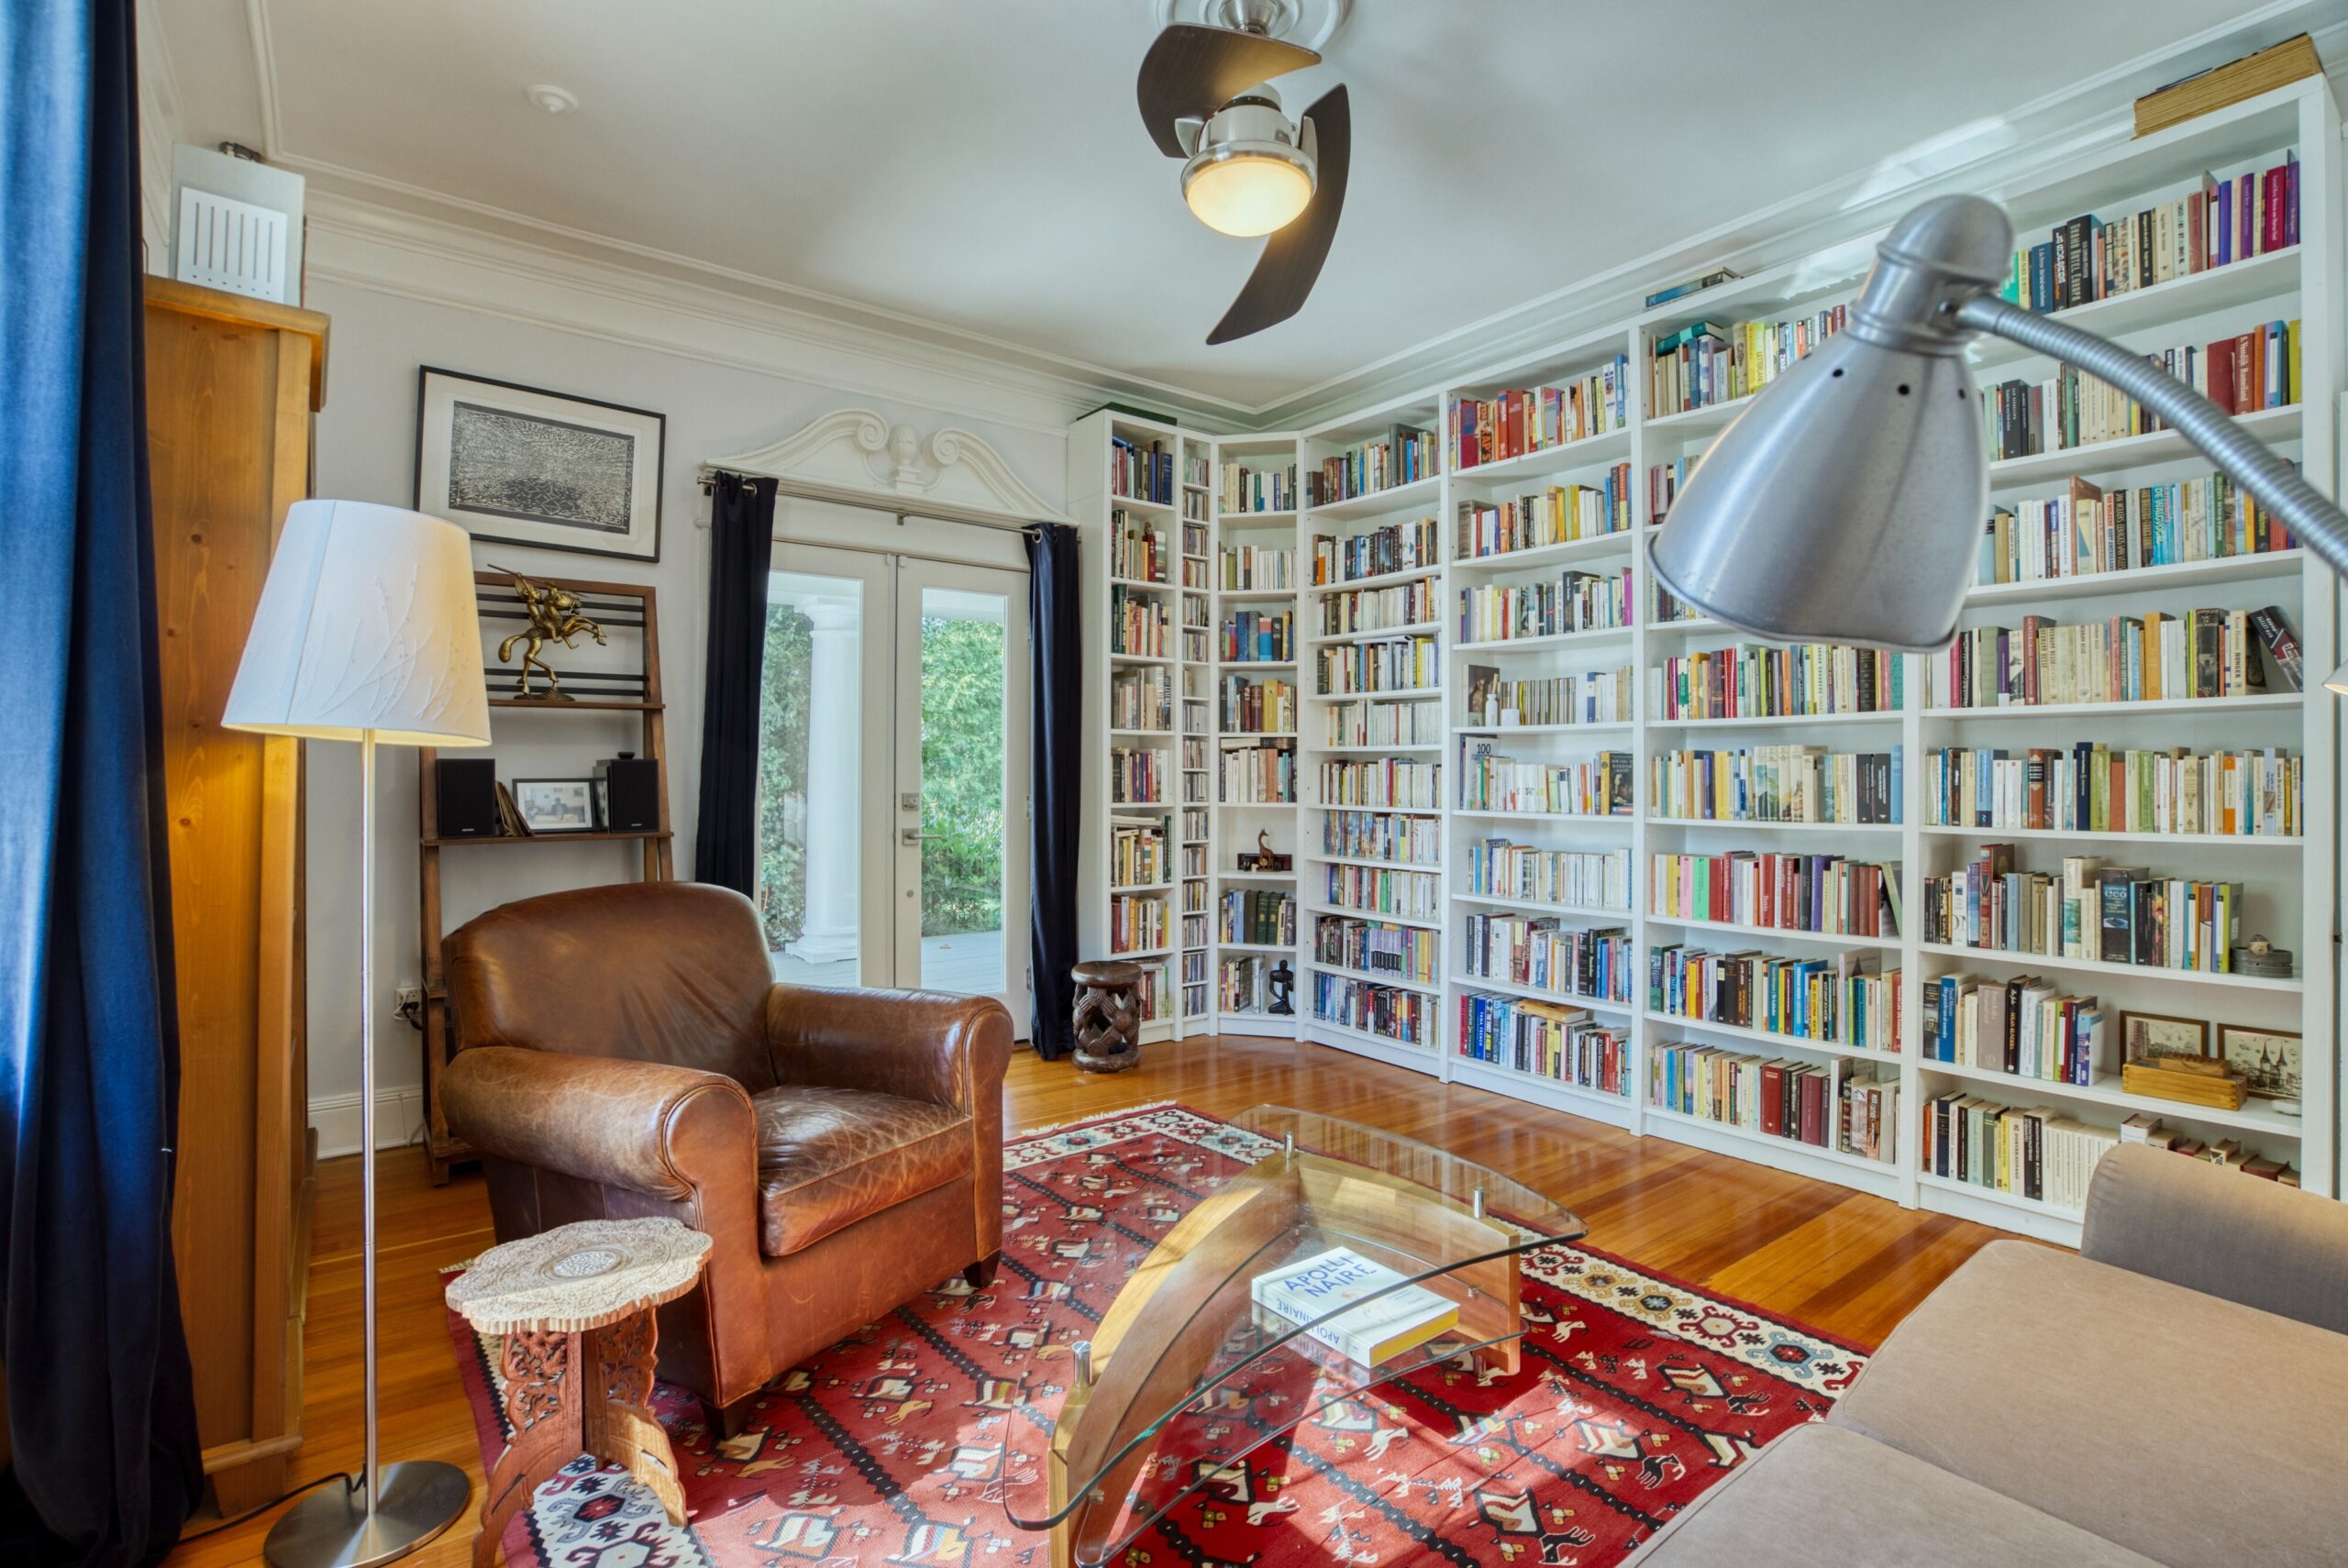 Interior professional photo of 1826 Varnum St NW - showing a study with built-in, floor-to-ceiling bookshelves, hardwood floors